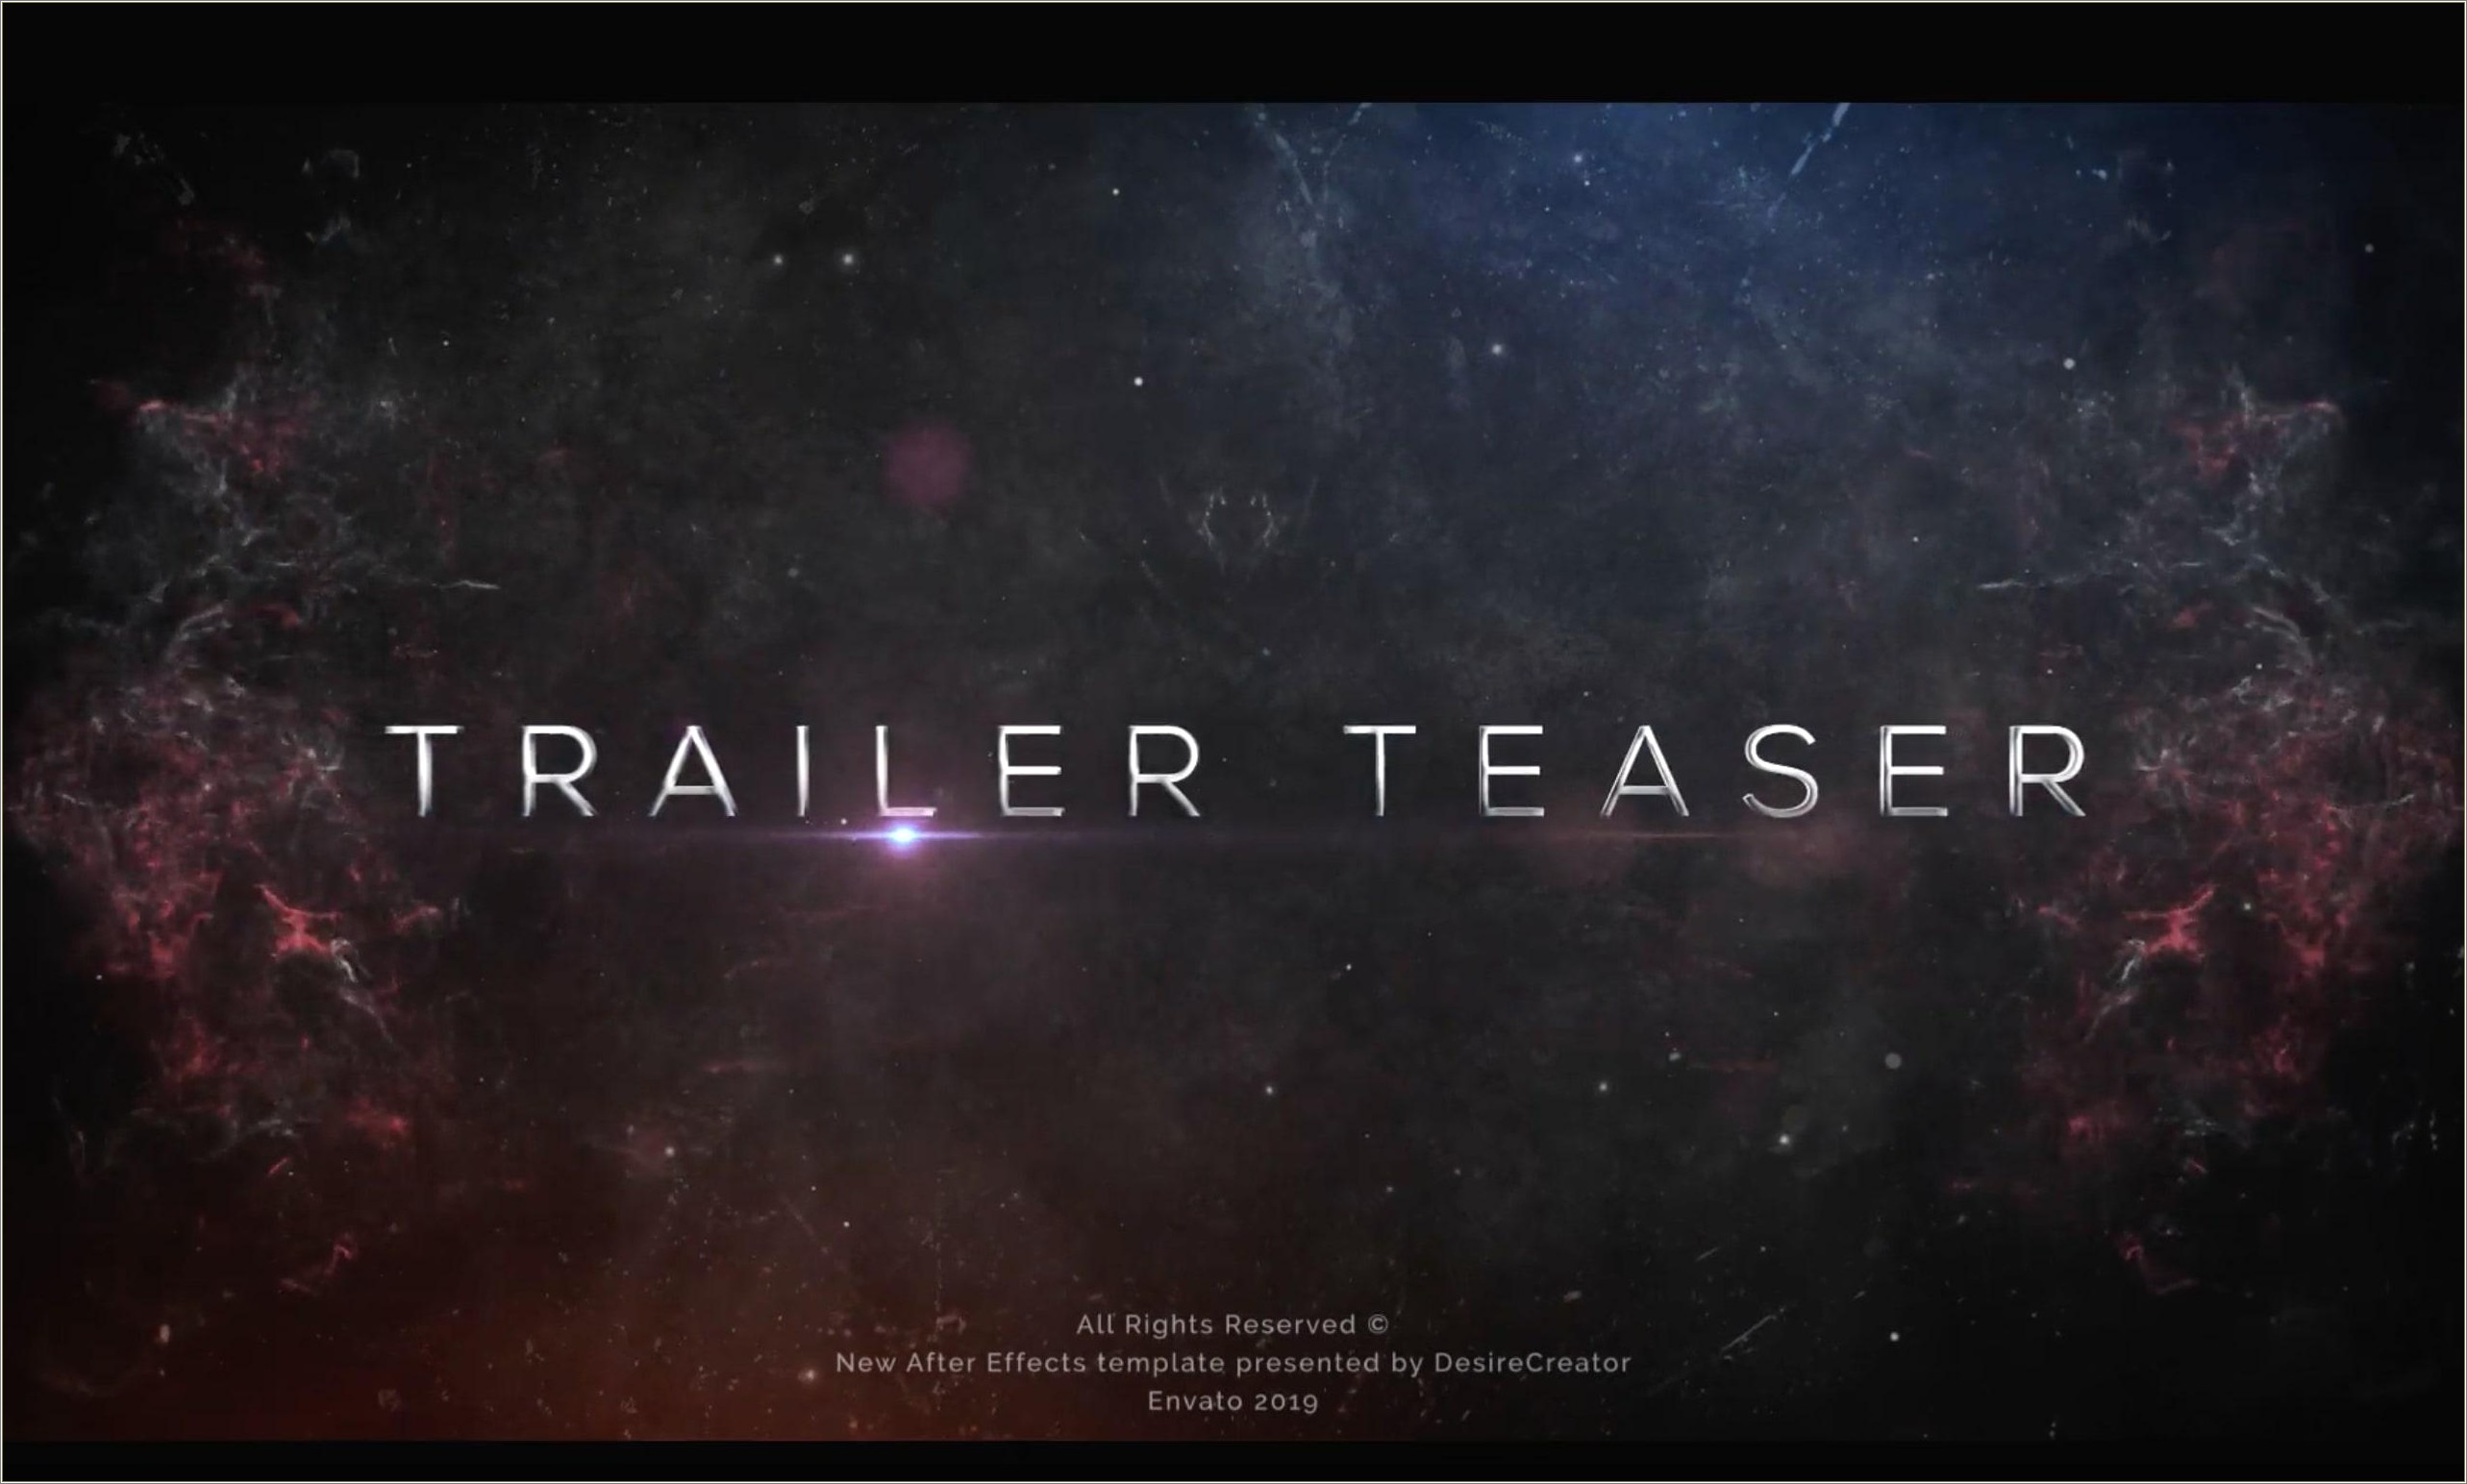 Blockbuster Trailer 12 After Effects Template Free Download